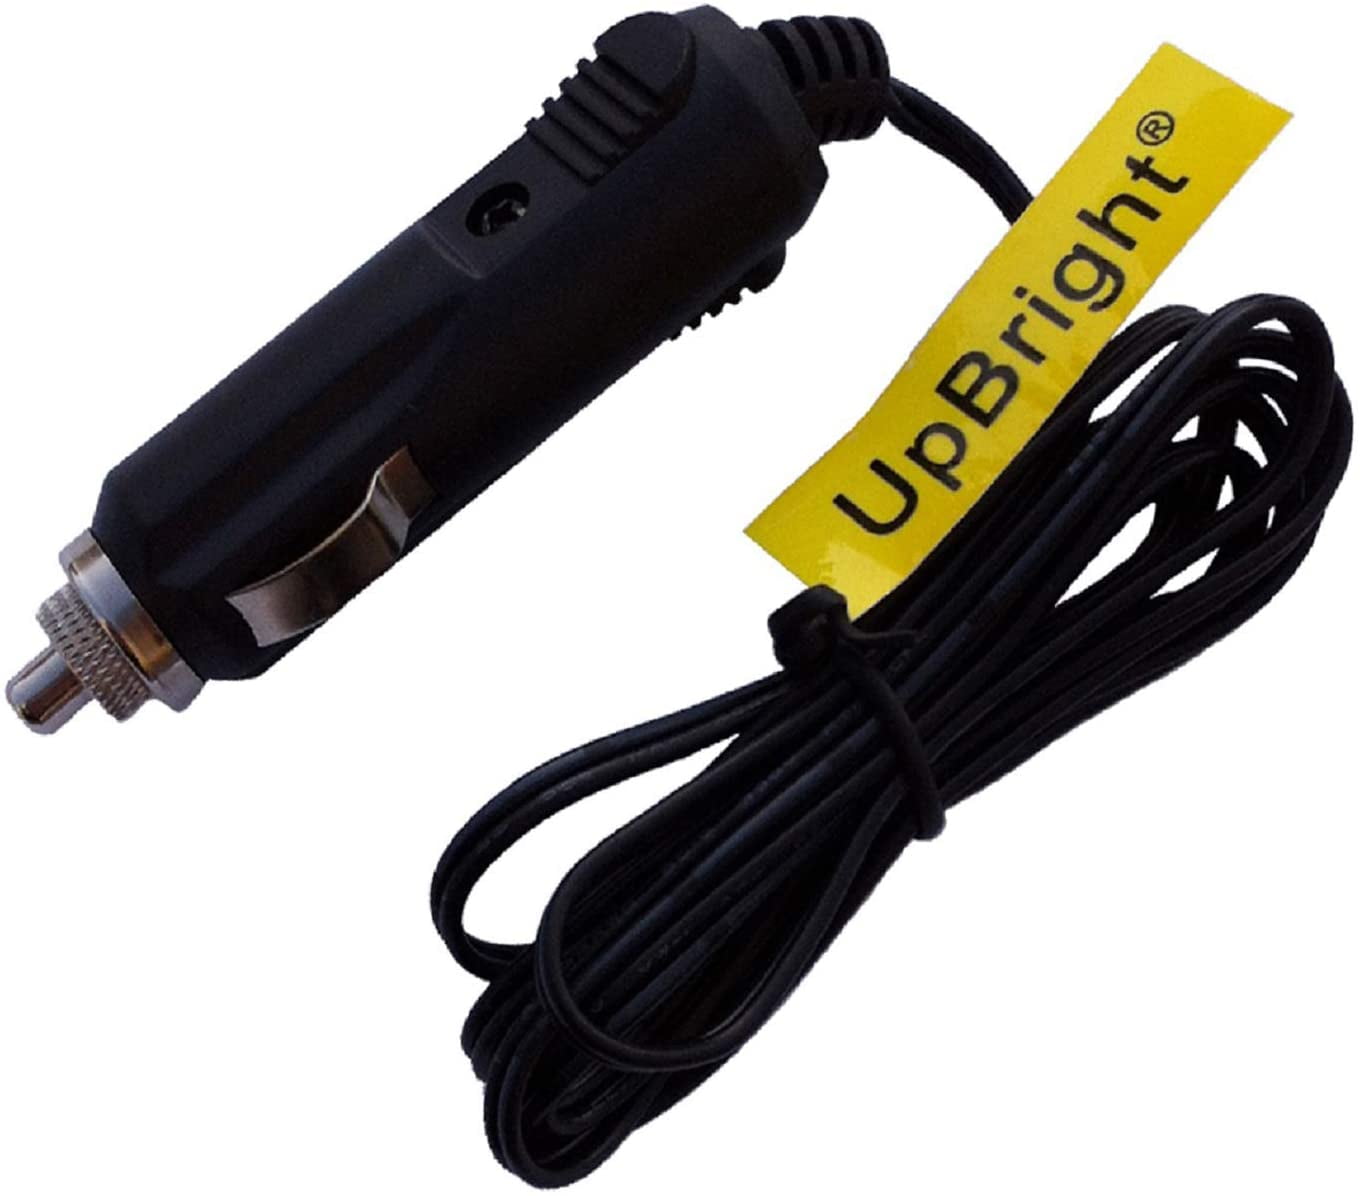 UPBRIGHT New Car DC Adapter For Tesco Technika PDVD908 Portable DVD Player  Auto Vehicle Boat RV Cigarette Lighter Plug Power Supply Cord Cable Charger